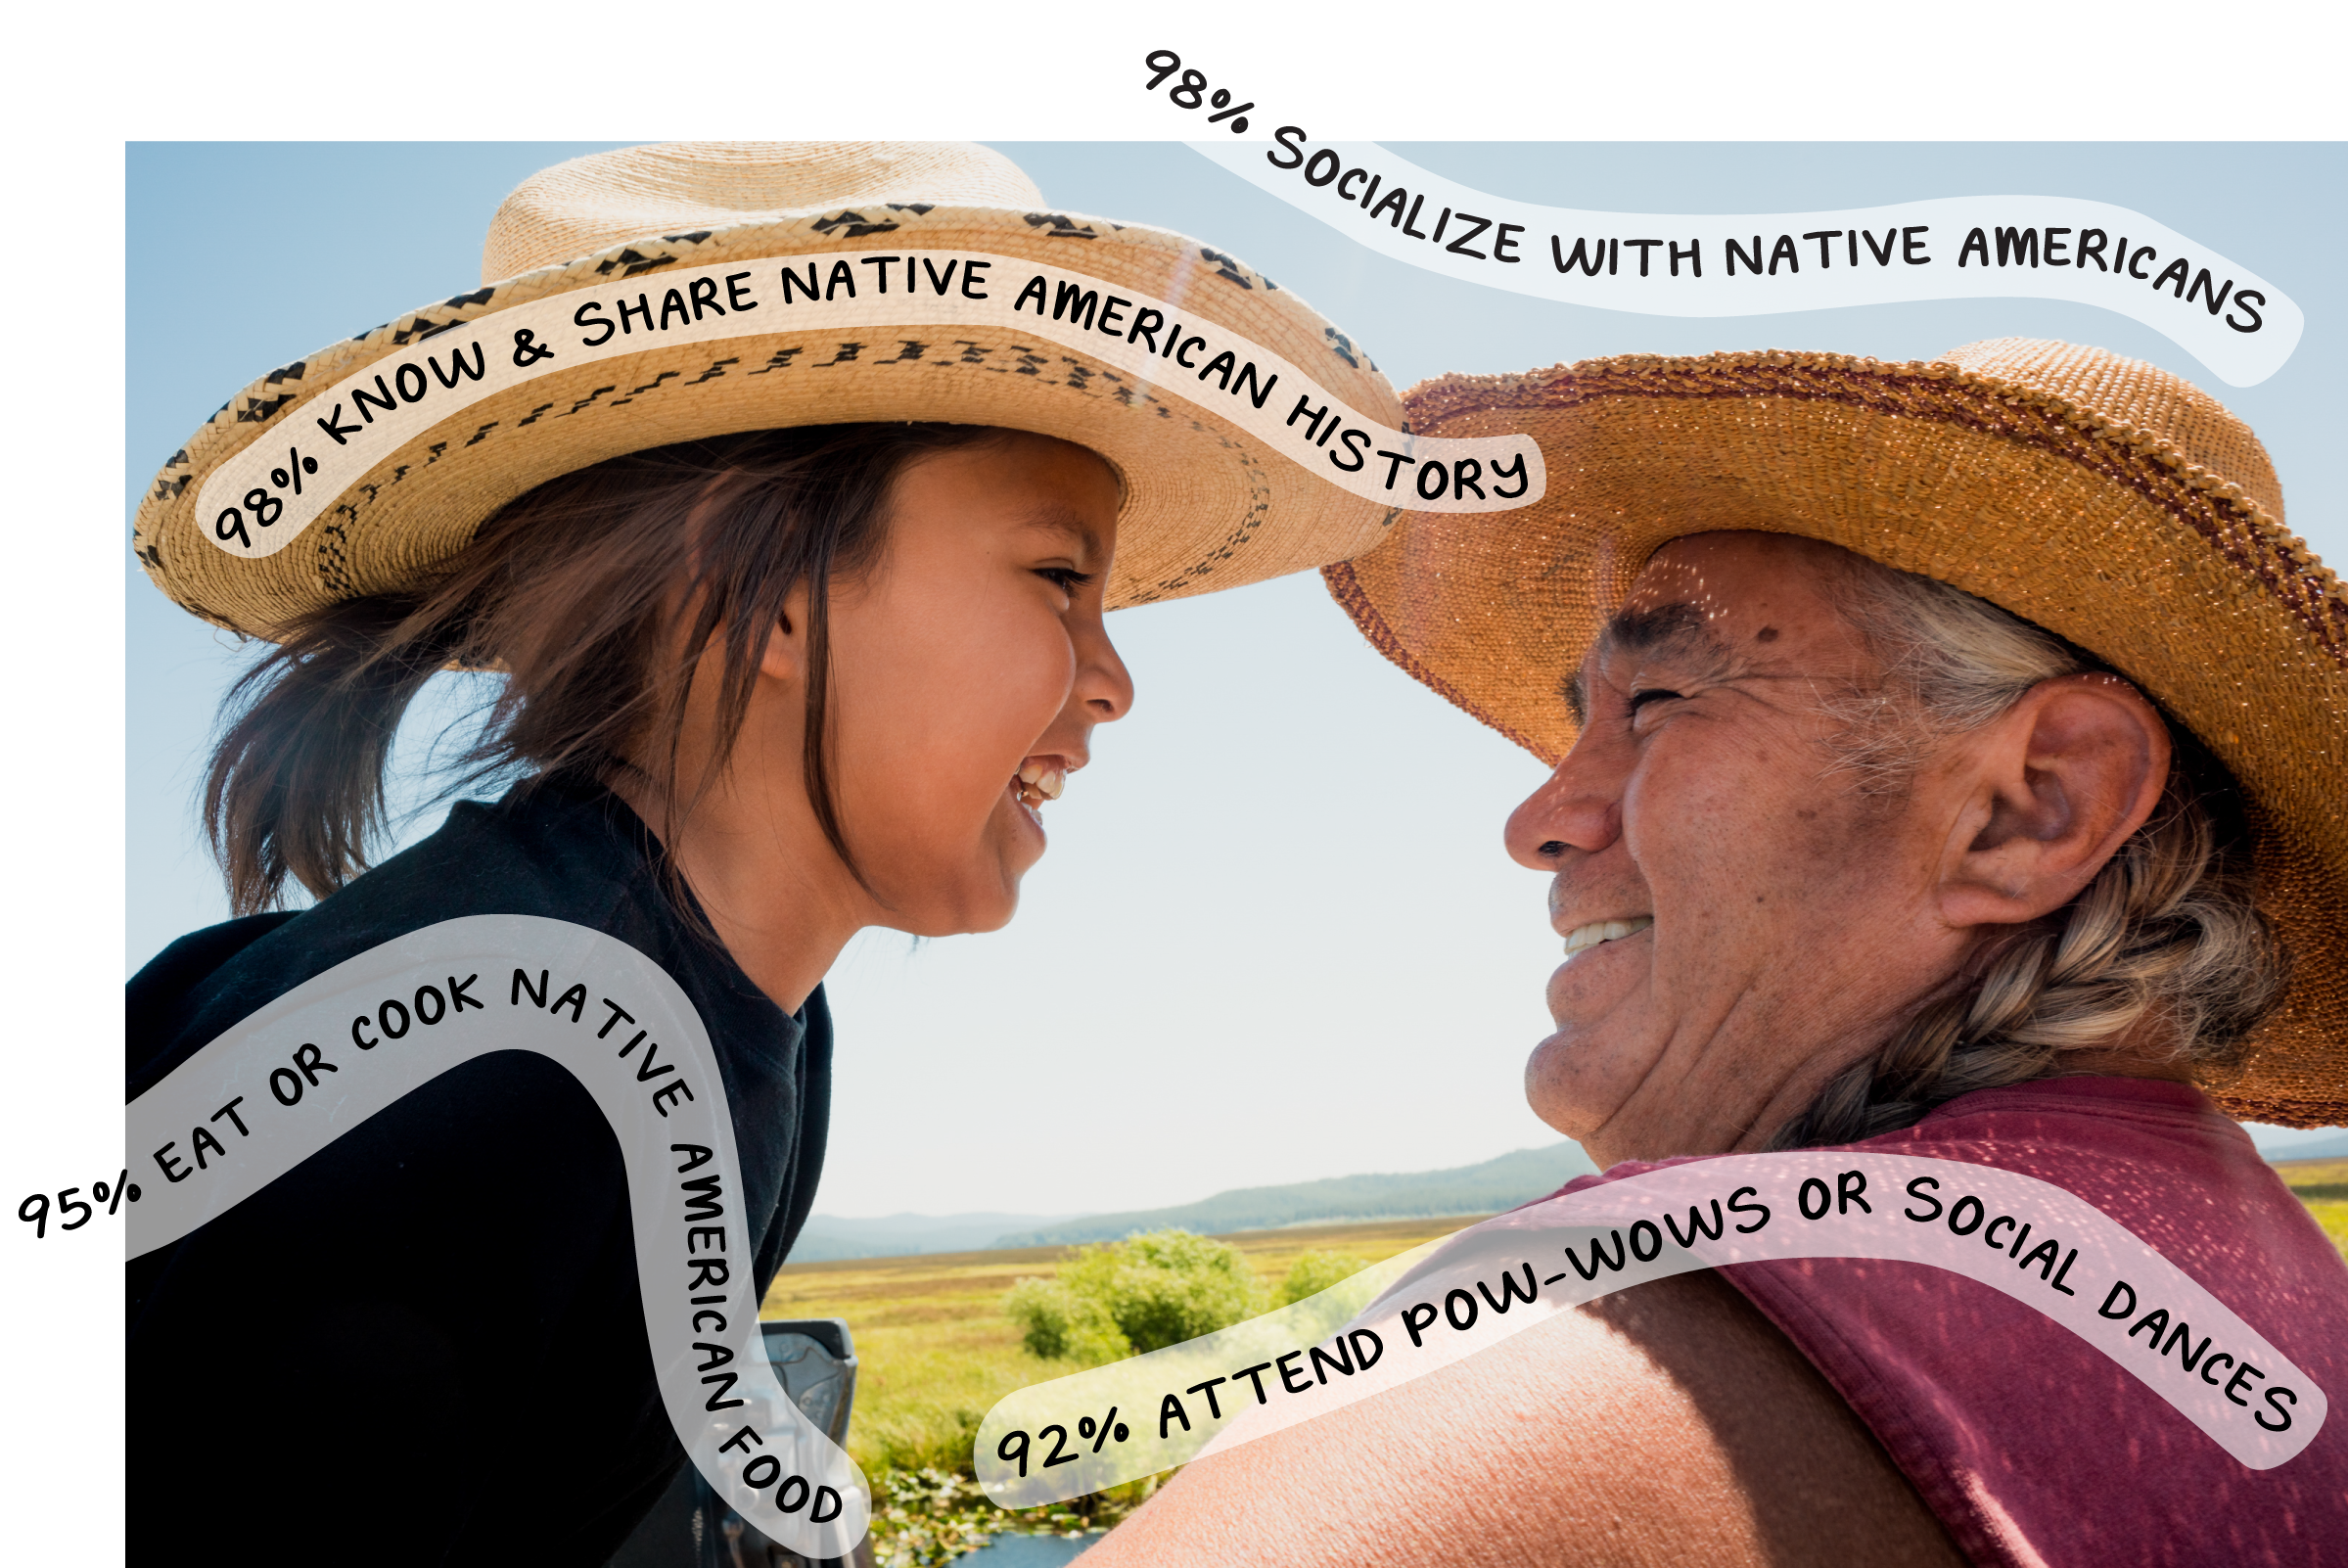 A picture of a Native American elder man and a Native boy. The text on the image says 98% socialize with other native americans, 98% know and share native american history, 95% eat or cook native american food, and 92% attend pow-wows or social dances.